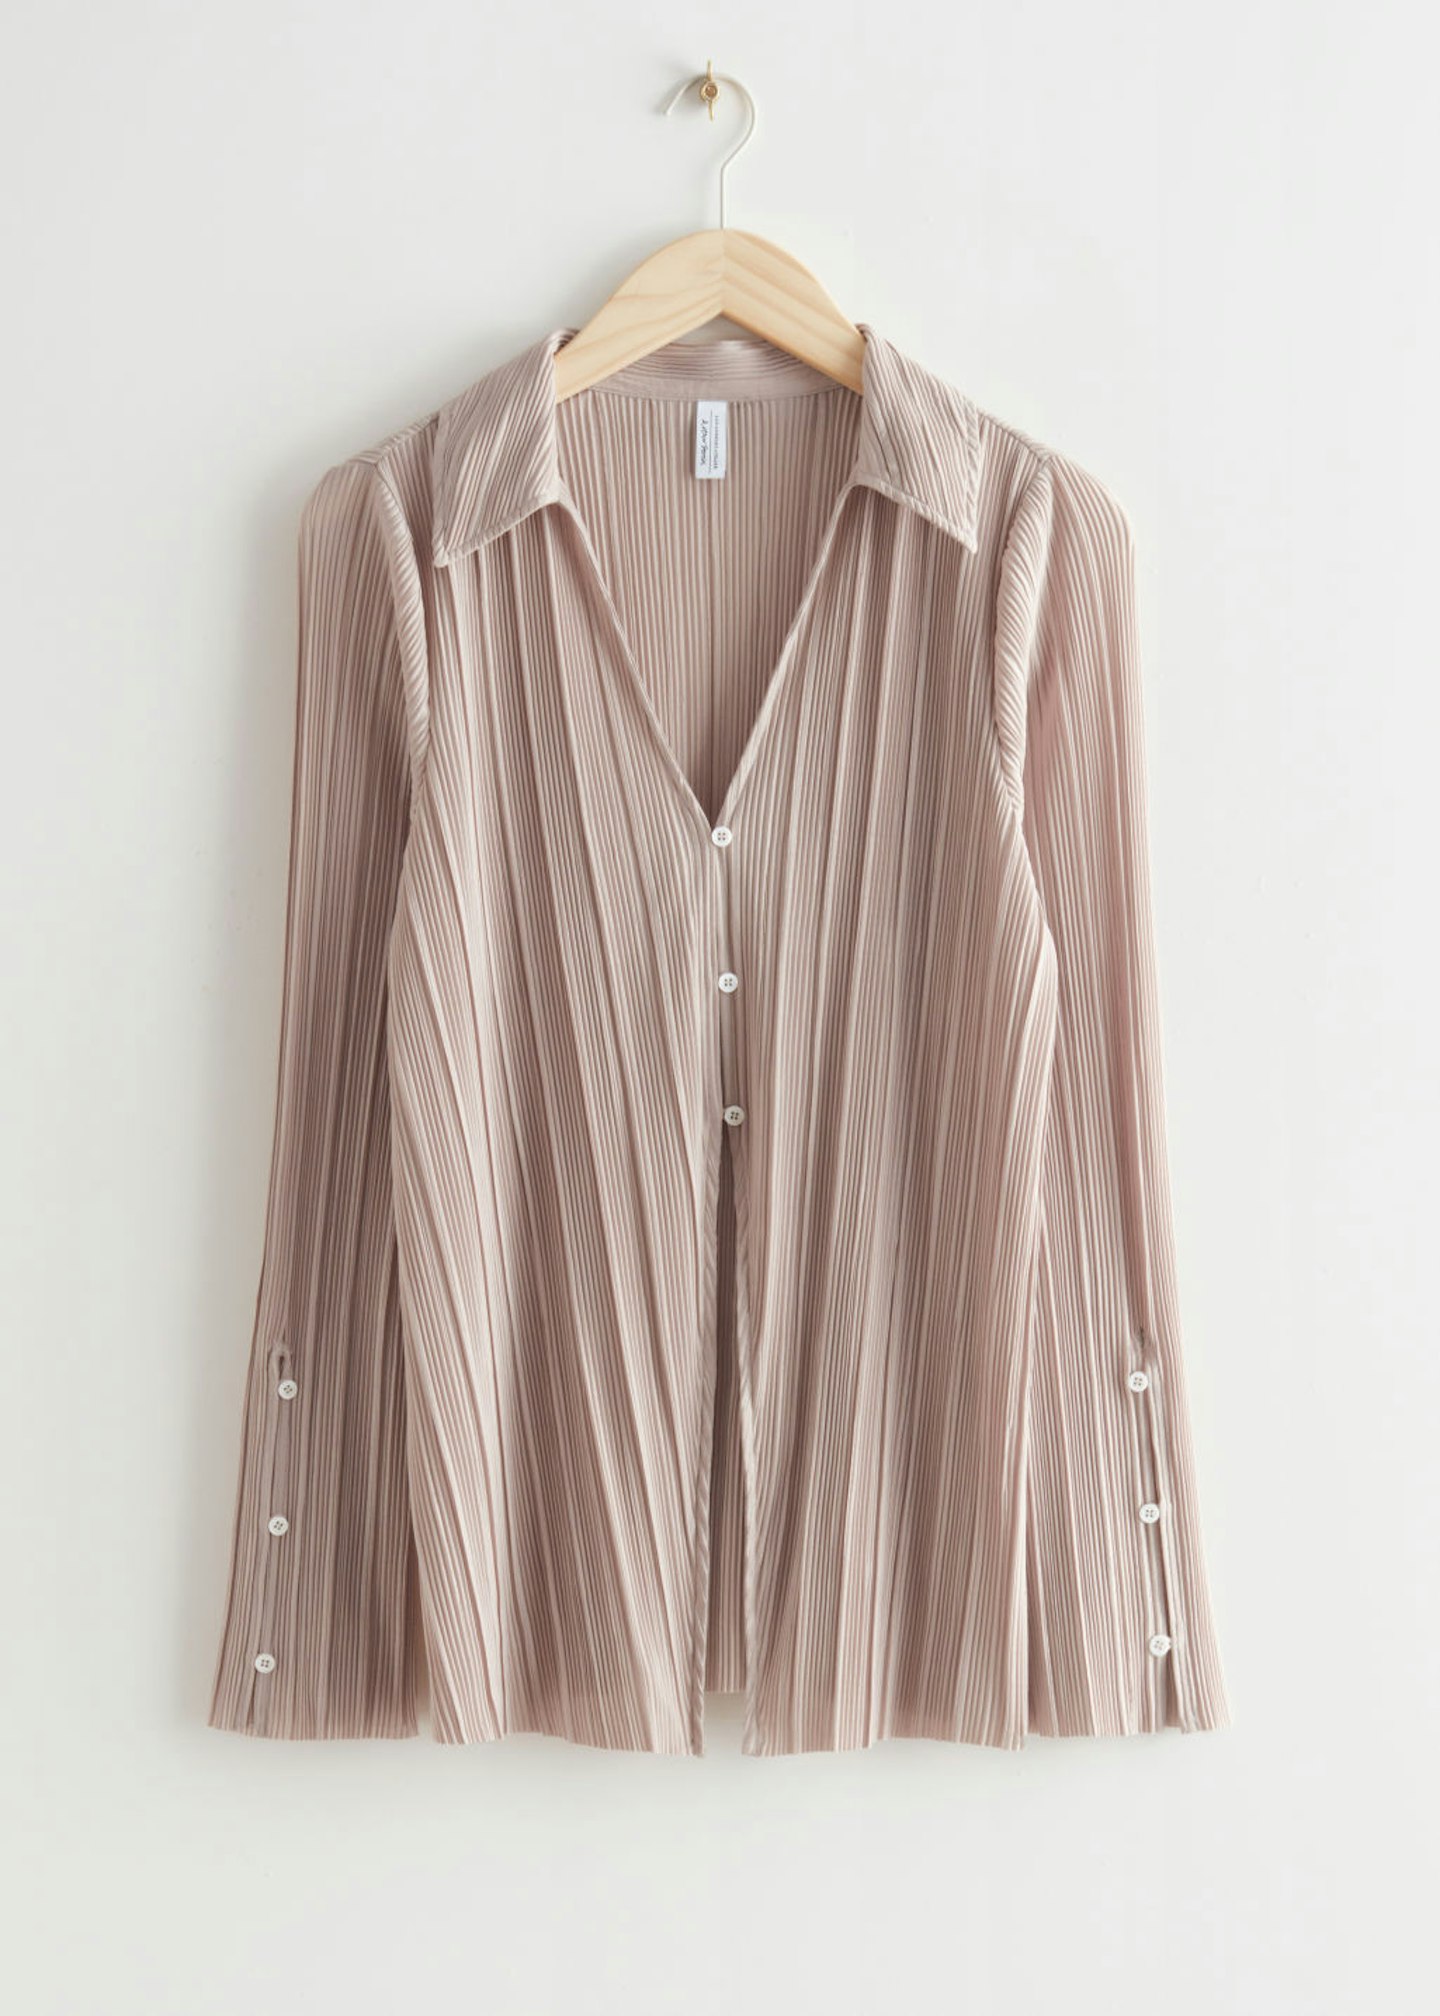 & Other Stories, Plissu00e9 Pleated Top, £45